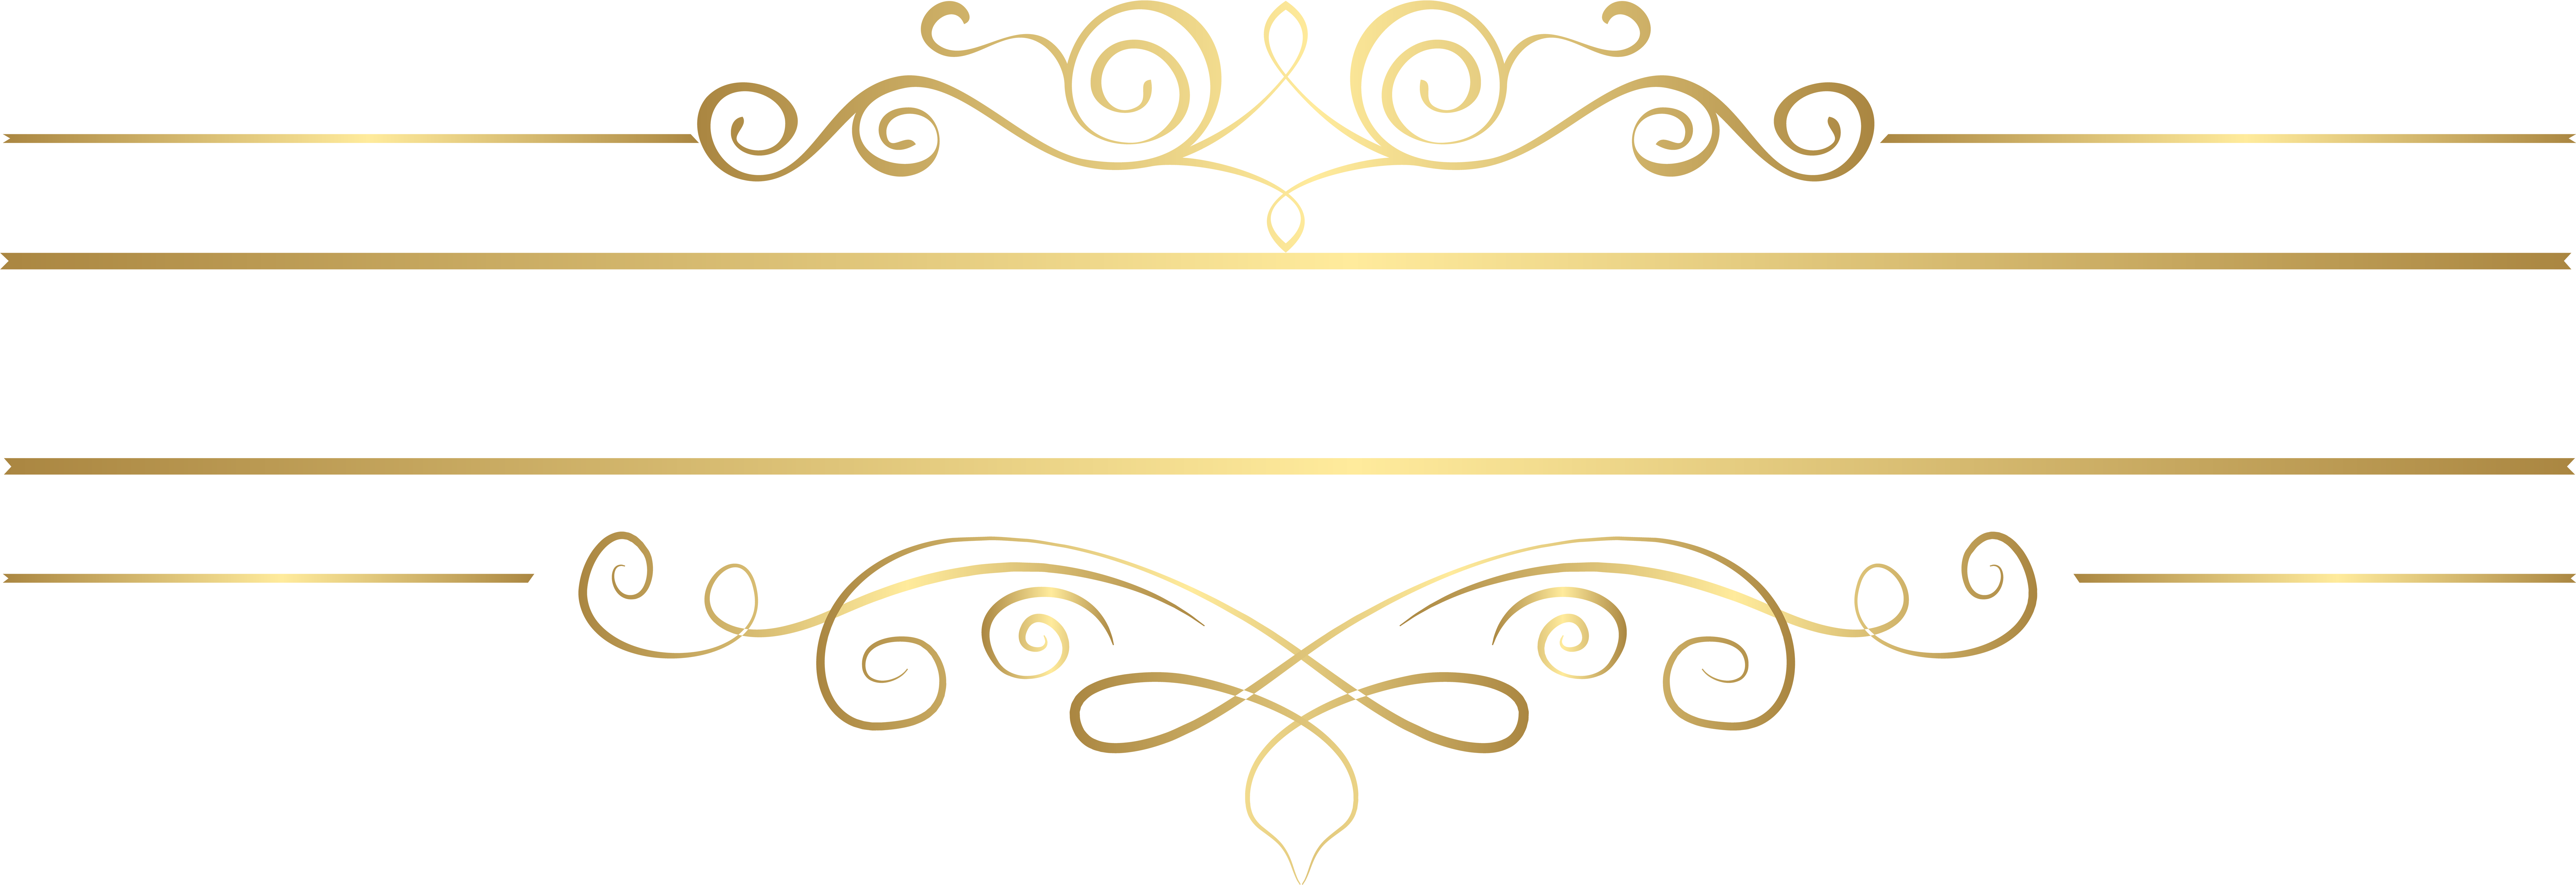 Free Gold Divider Png Download Free Gold Divider Png Png Images Free Cliparts On Clipart Library